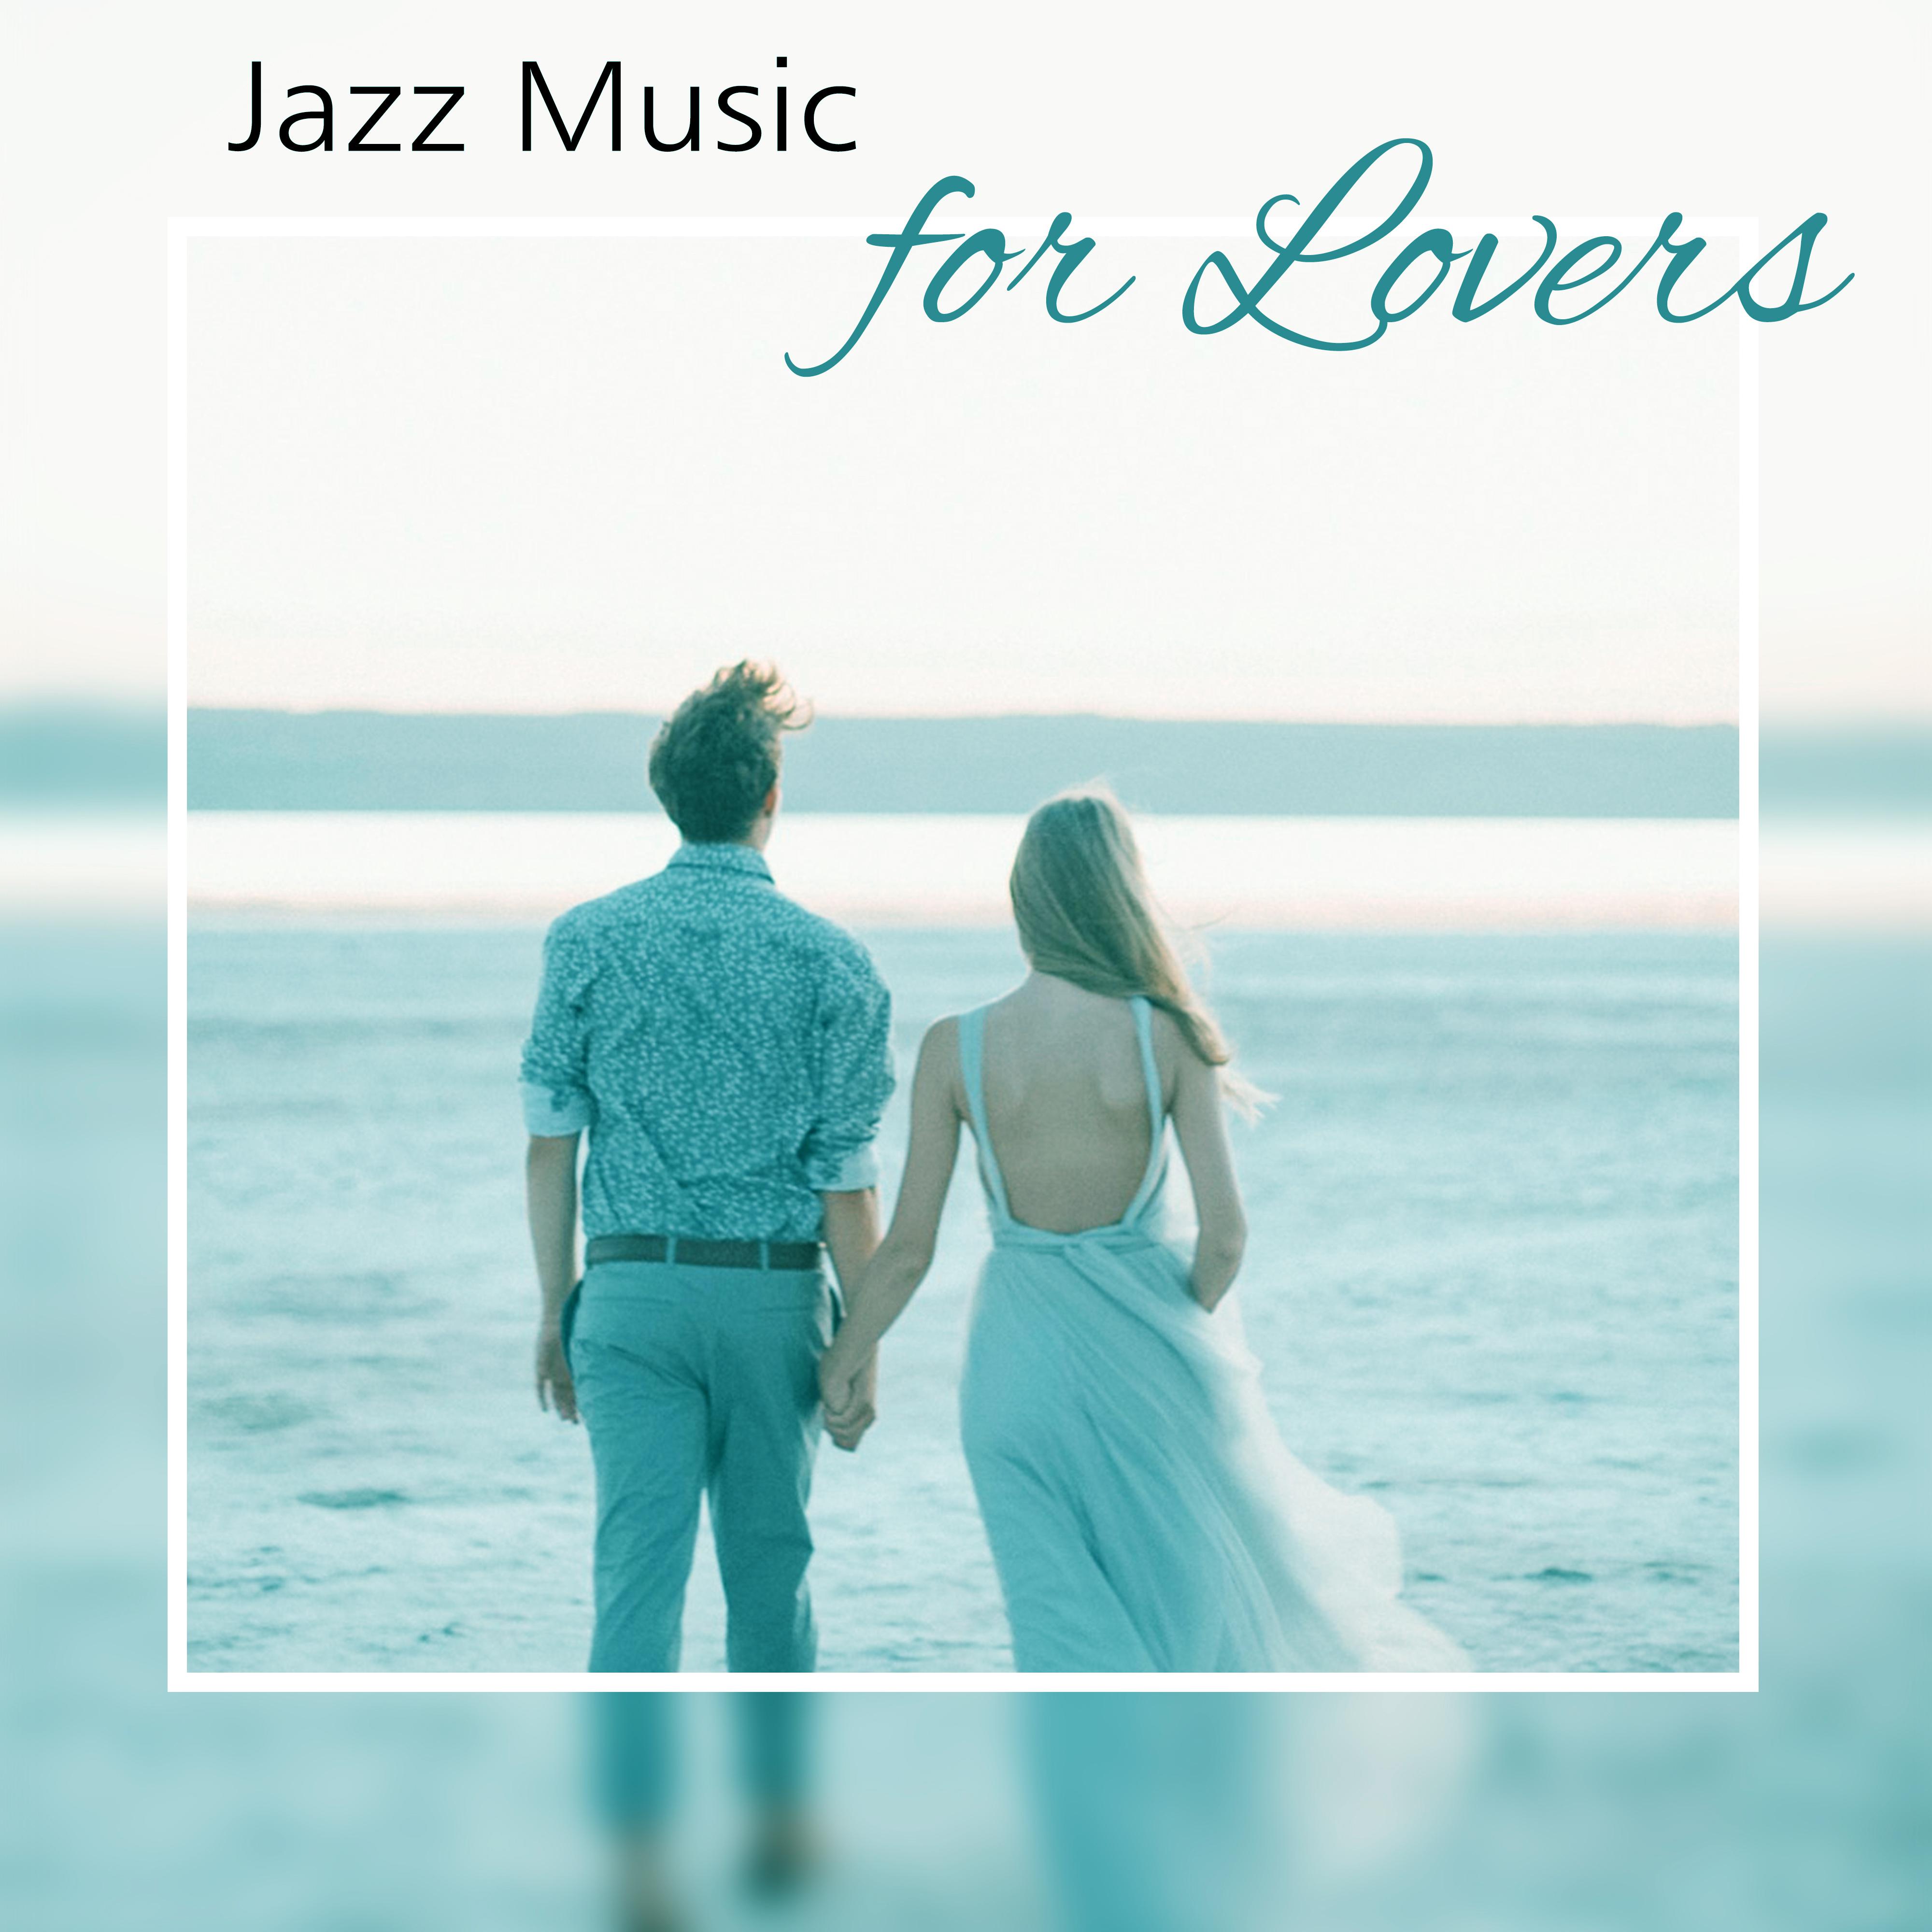 Jazz Music for Lovers  Romantic Jazz Sounds, Music for First Date, Candle Light Dinner, Hot Jazz Note